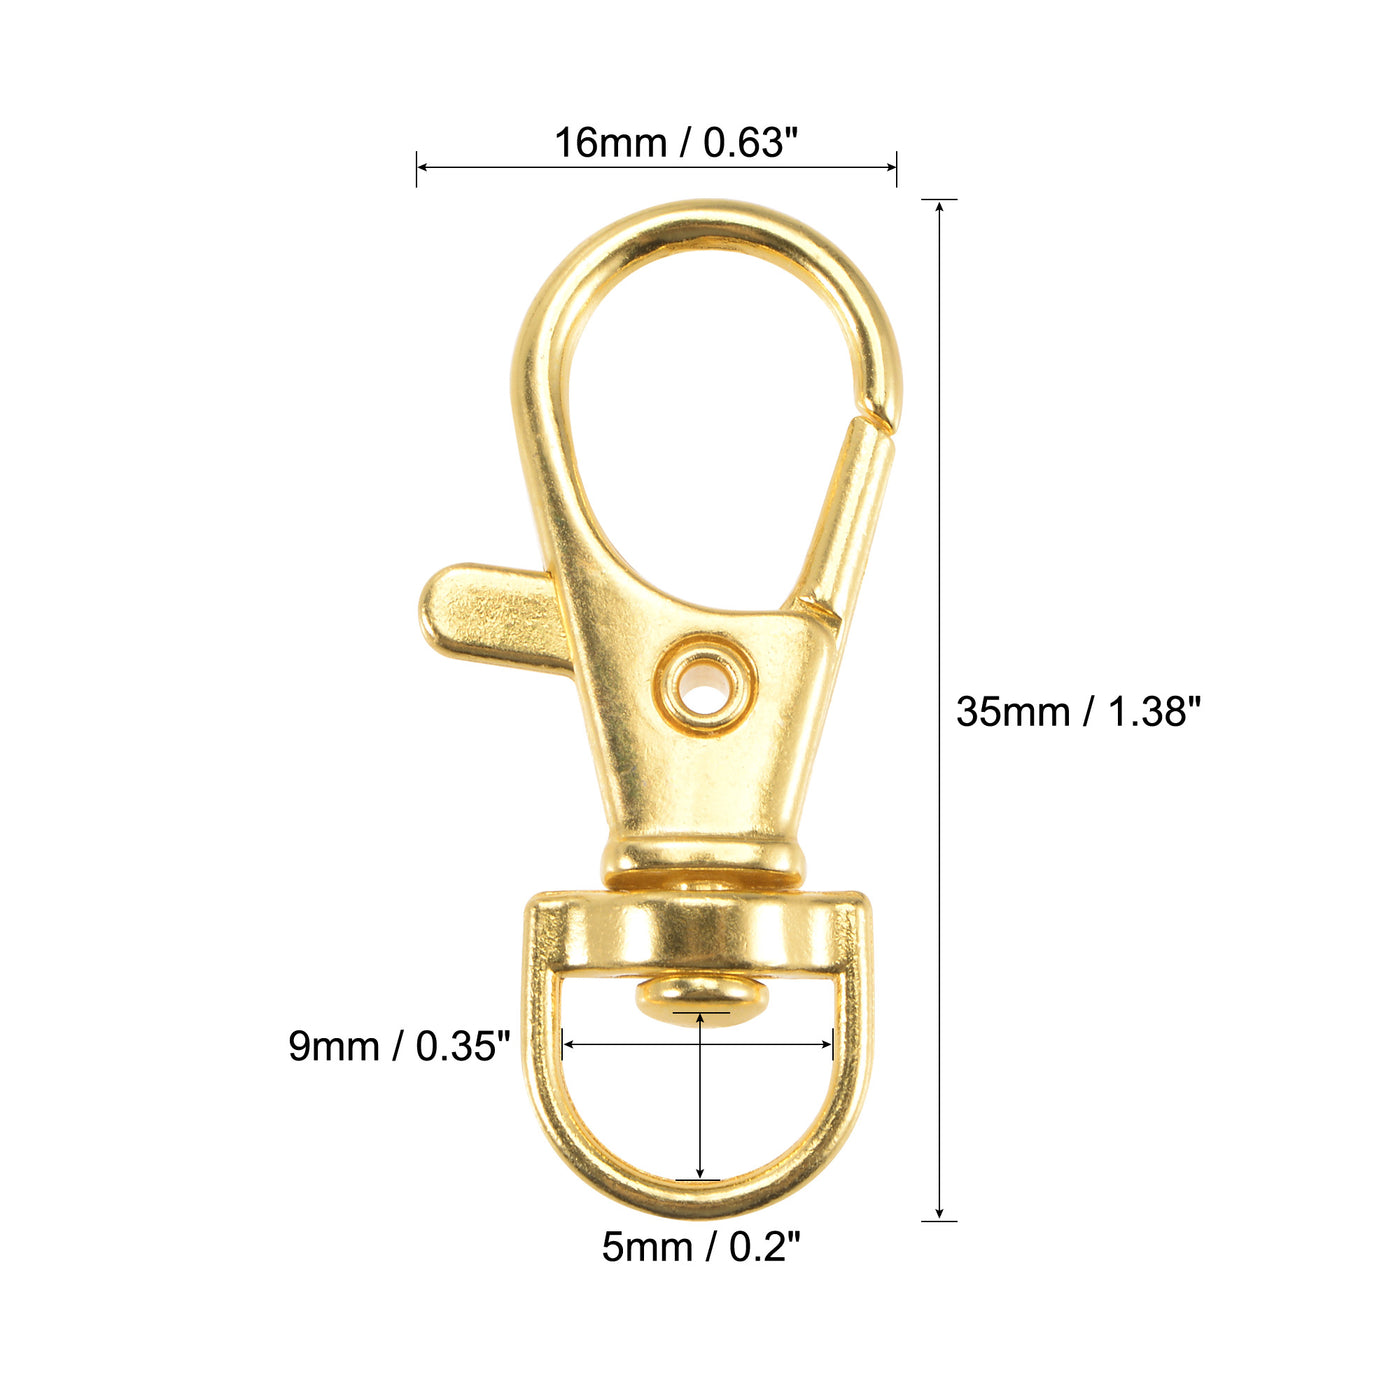 Uxcell Uxcell Swivel Clasps Lanyard Snap Hook 35mm Length, Zinc Alloy, Golden, for DIY Crafts Keychains, 30pcs